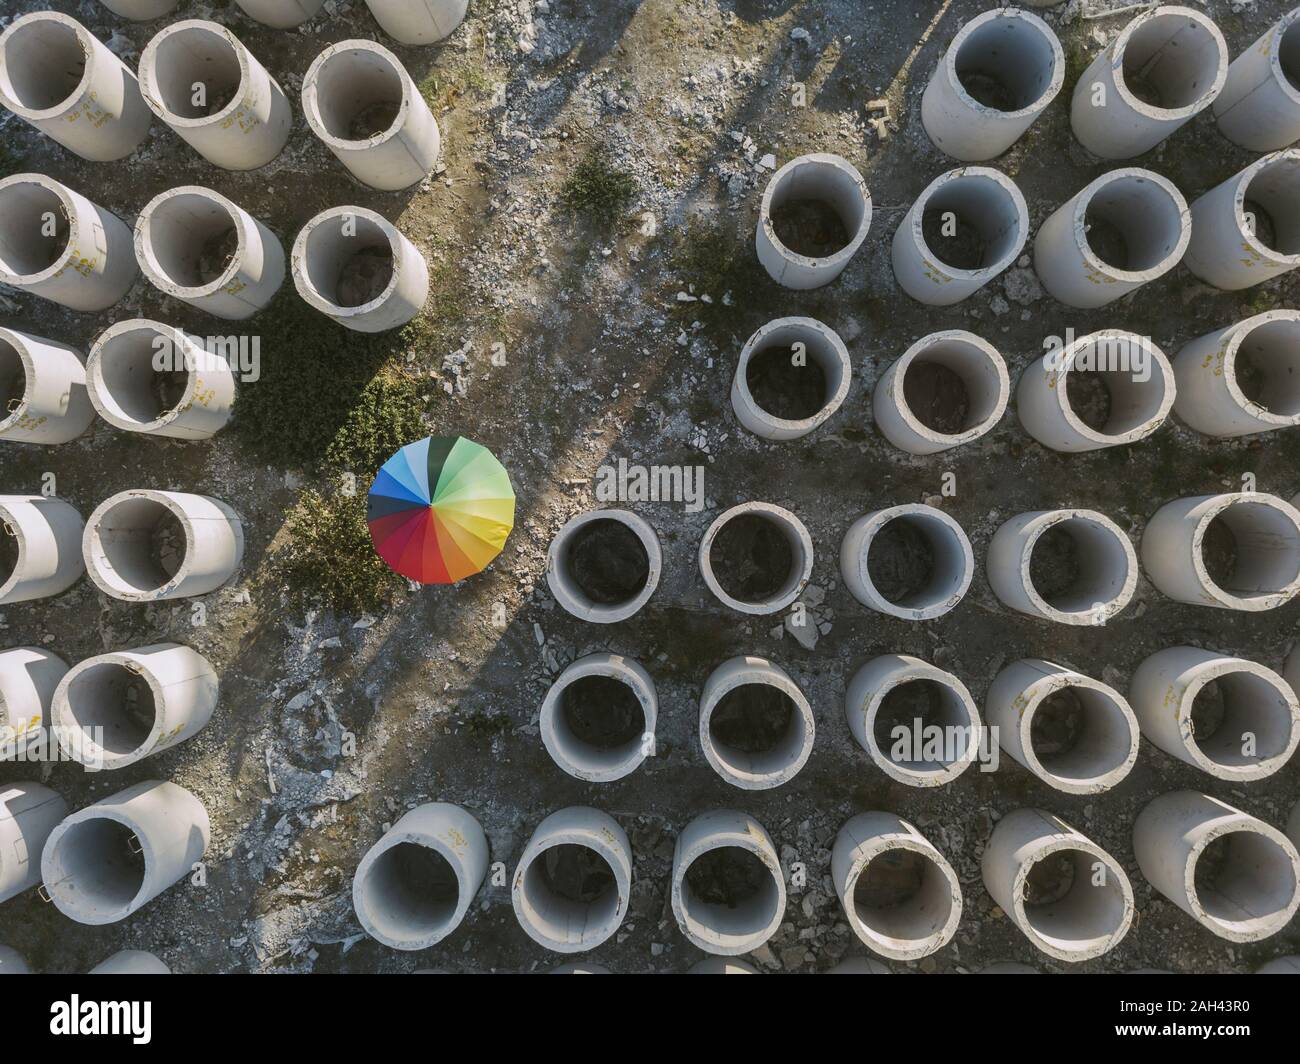 Aerial view of umbrella and concrete hoops Stock Photo